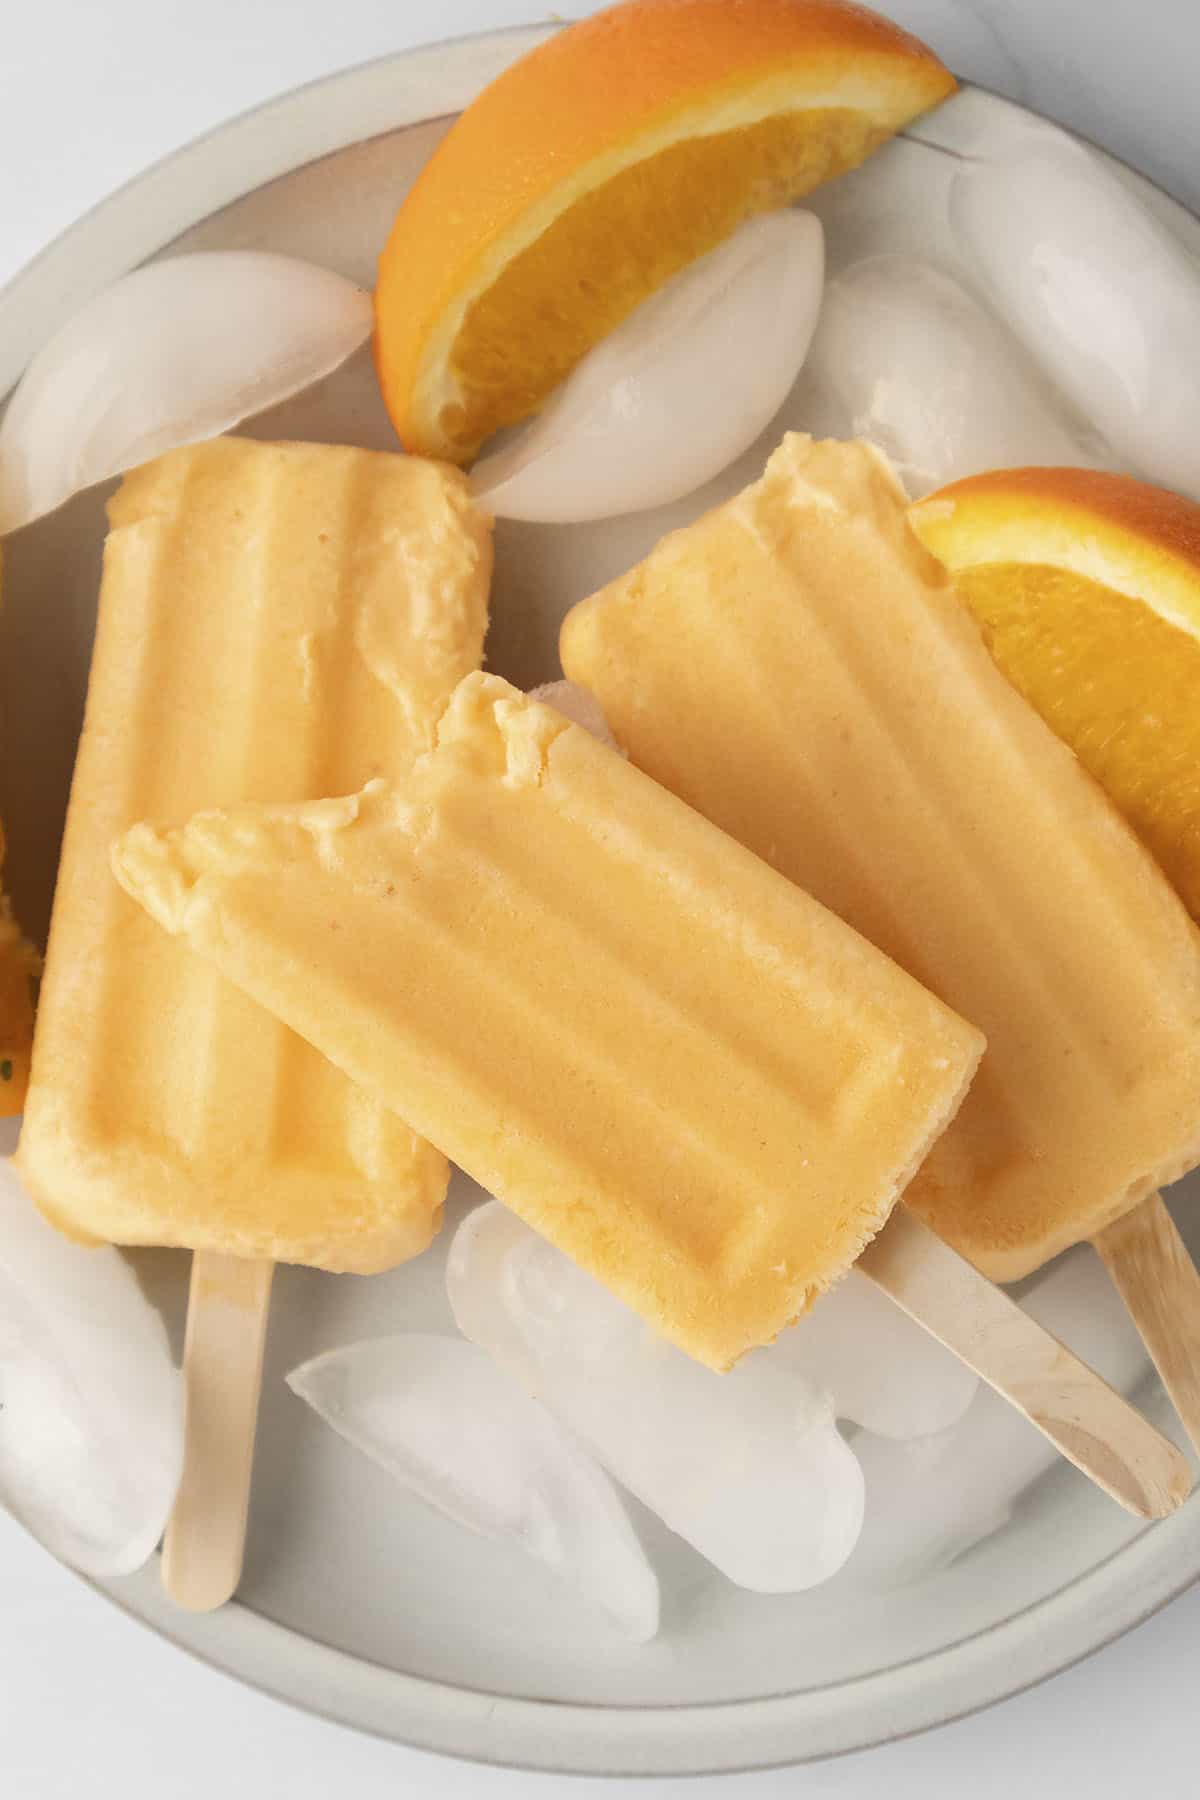 Orange cream popsicle with a bite taken out.